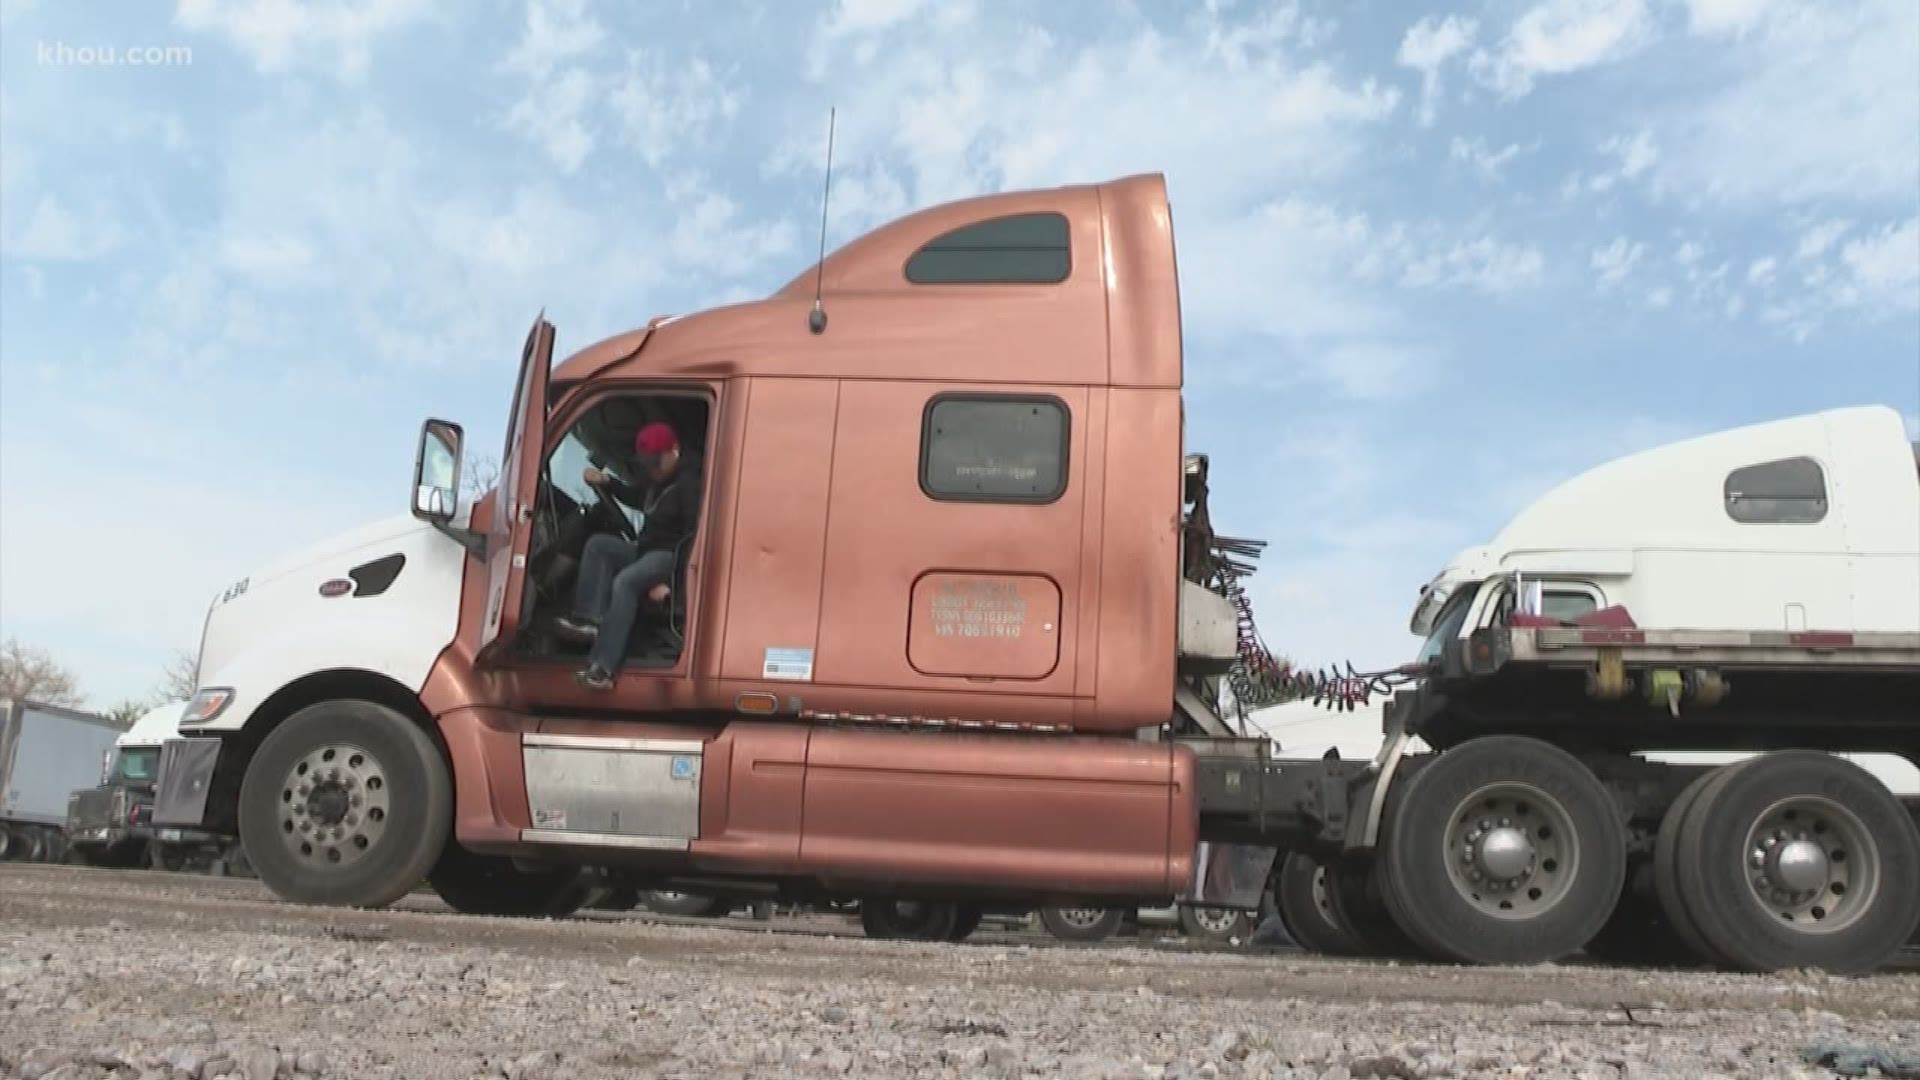 After Celadon abruptly closed, local truckers are helping other truckers affected by the closure get back on their feet.